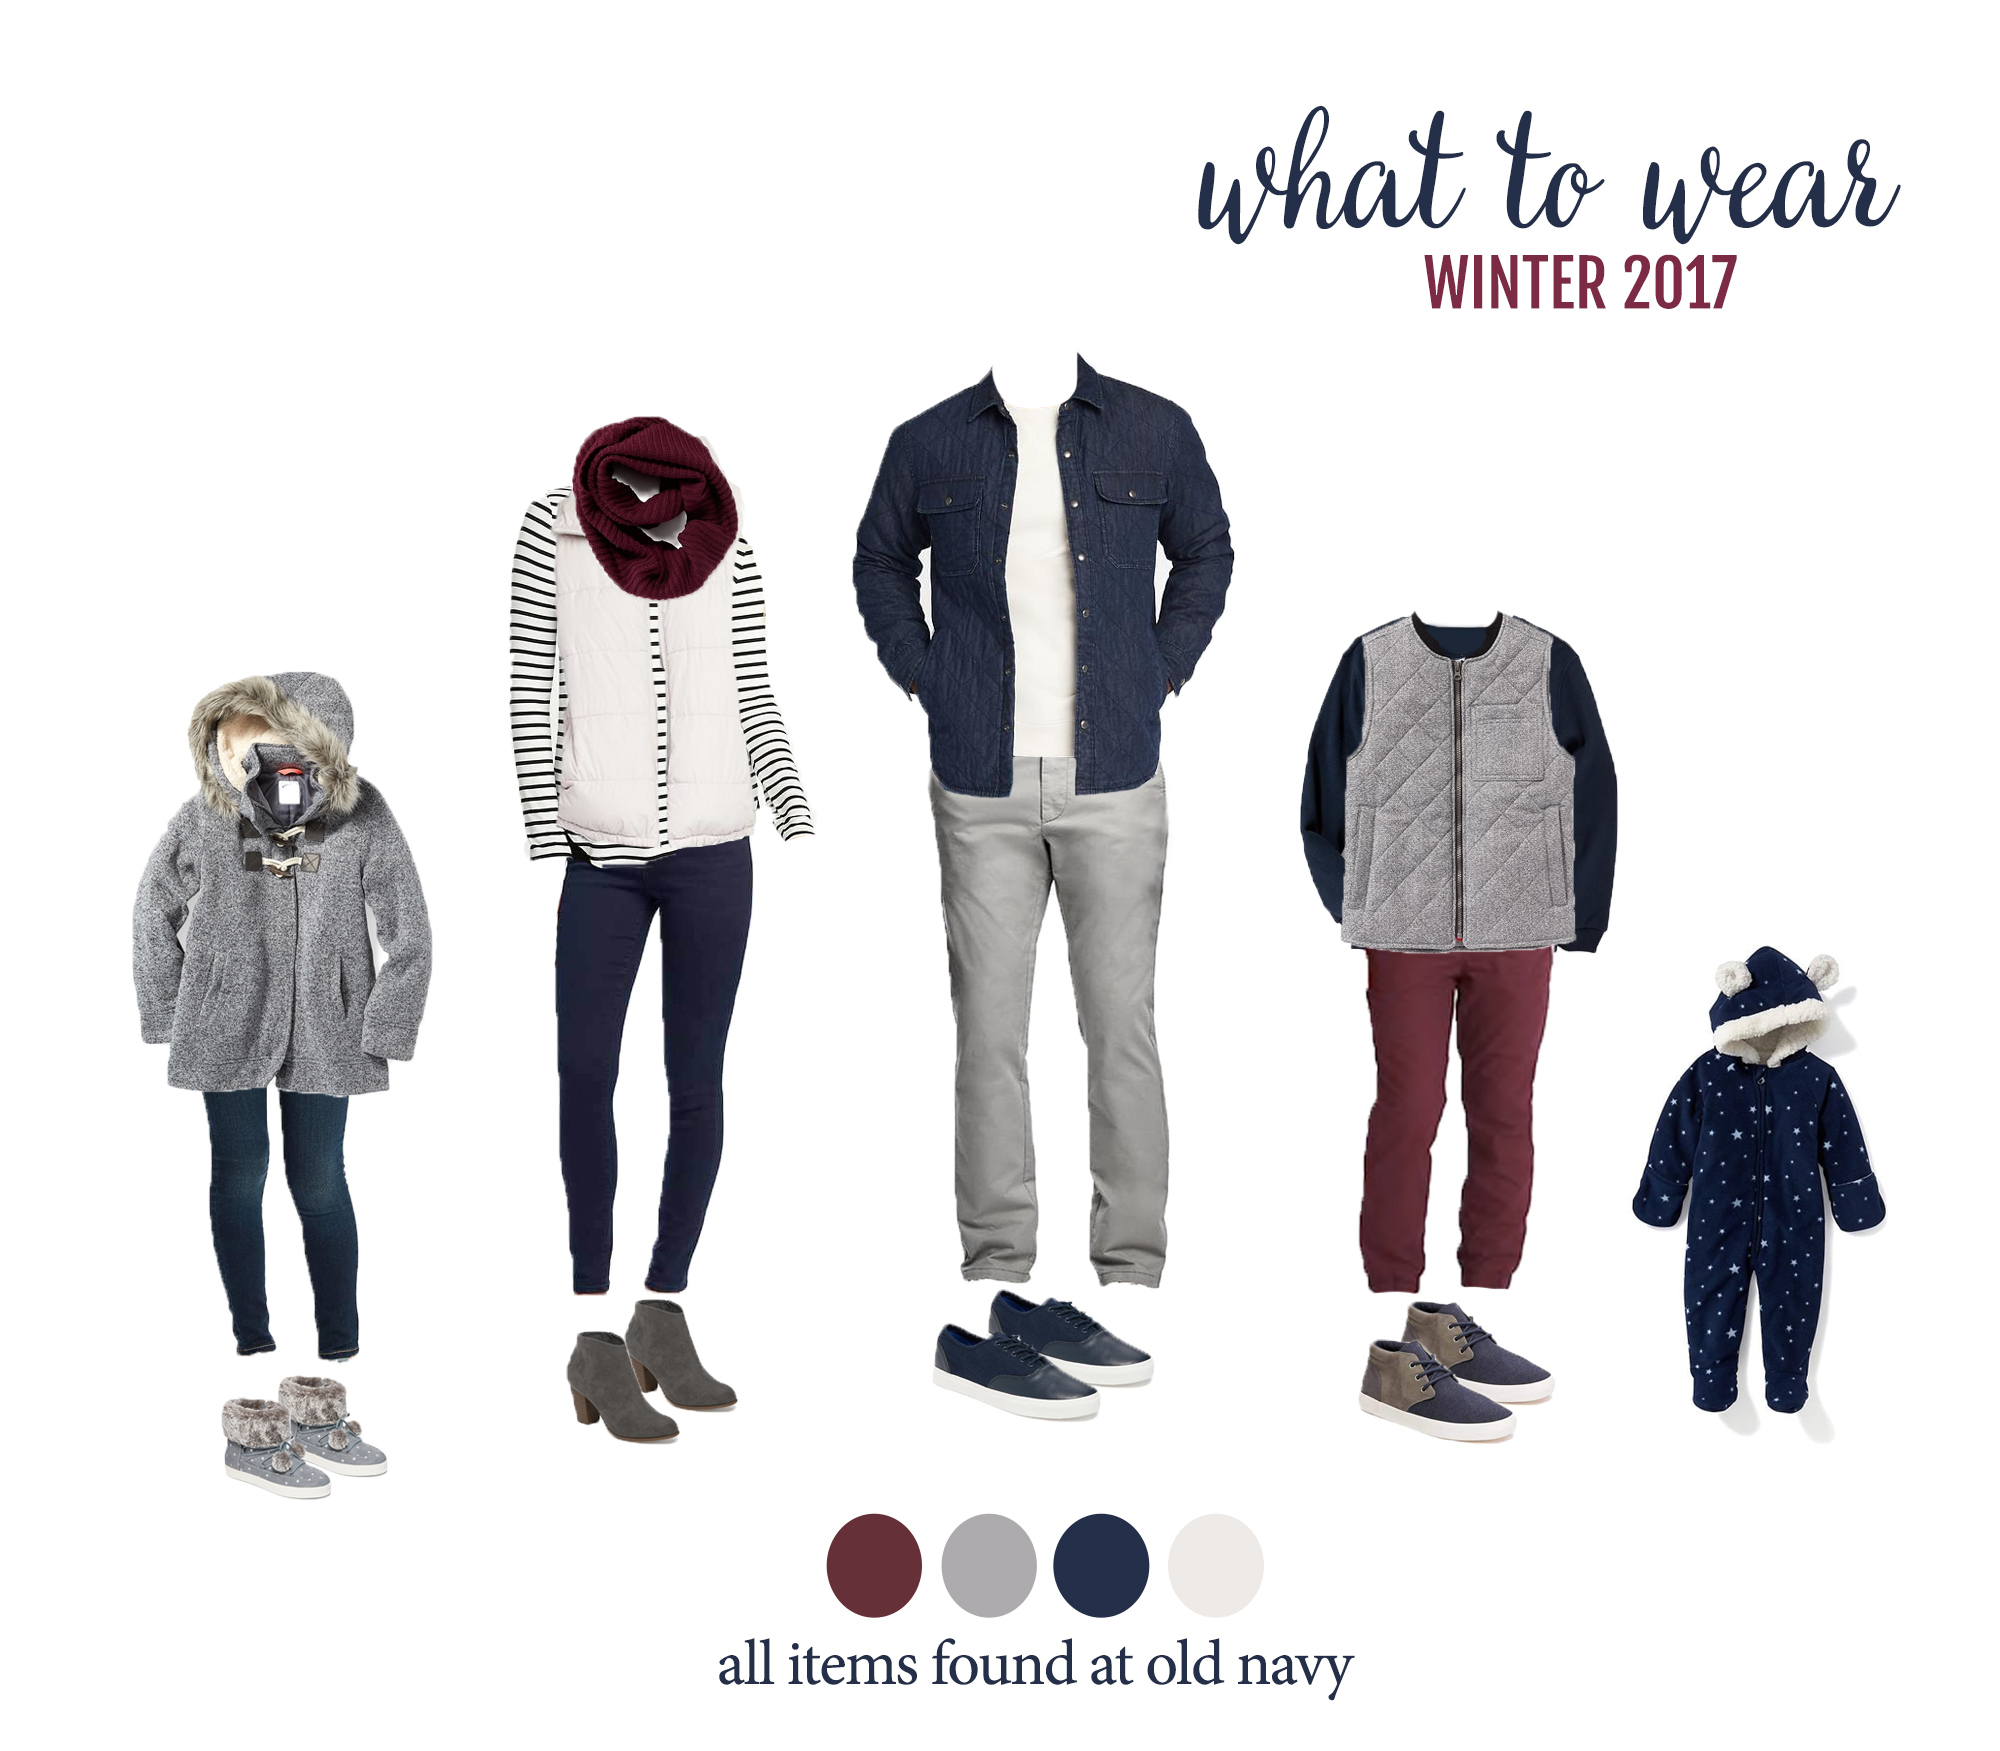 What to wear for winter family photos! Adorable & affordable outfits for the entire family. Perfect for your photos with Denver photographer, Miss Freddy!